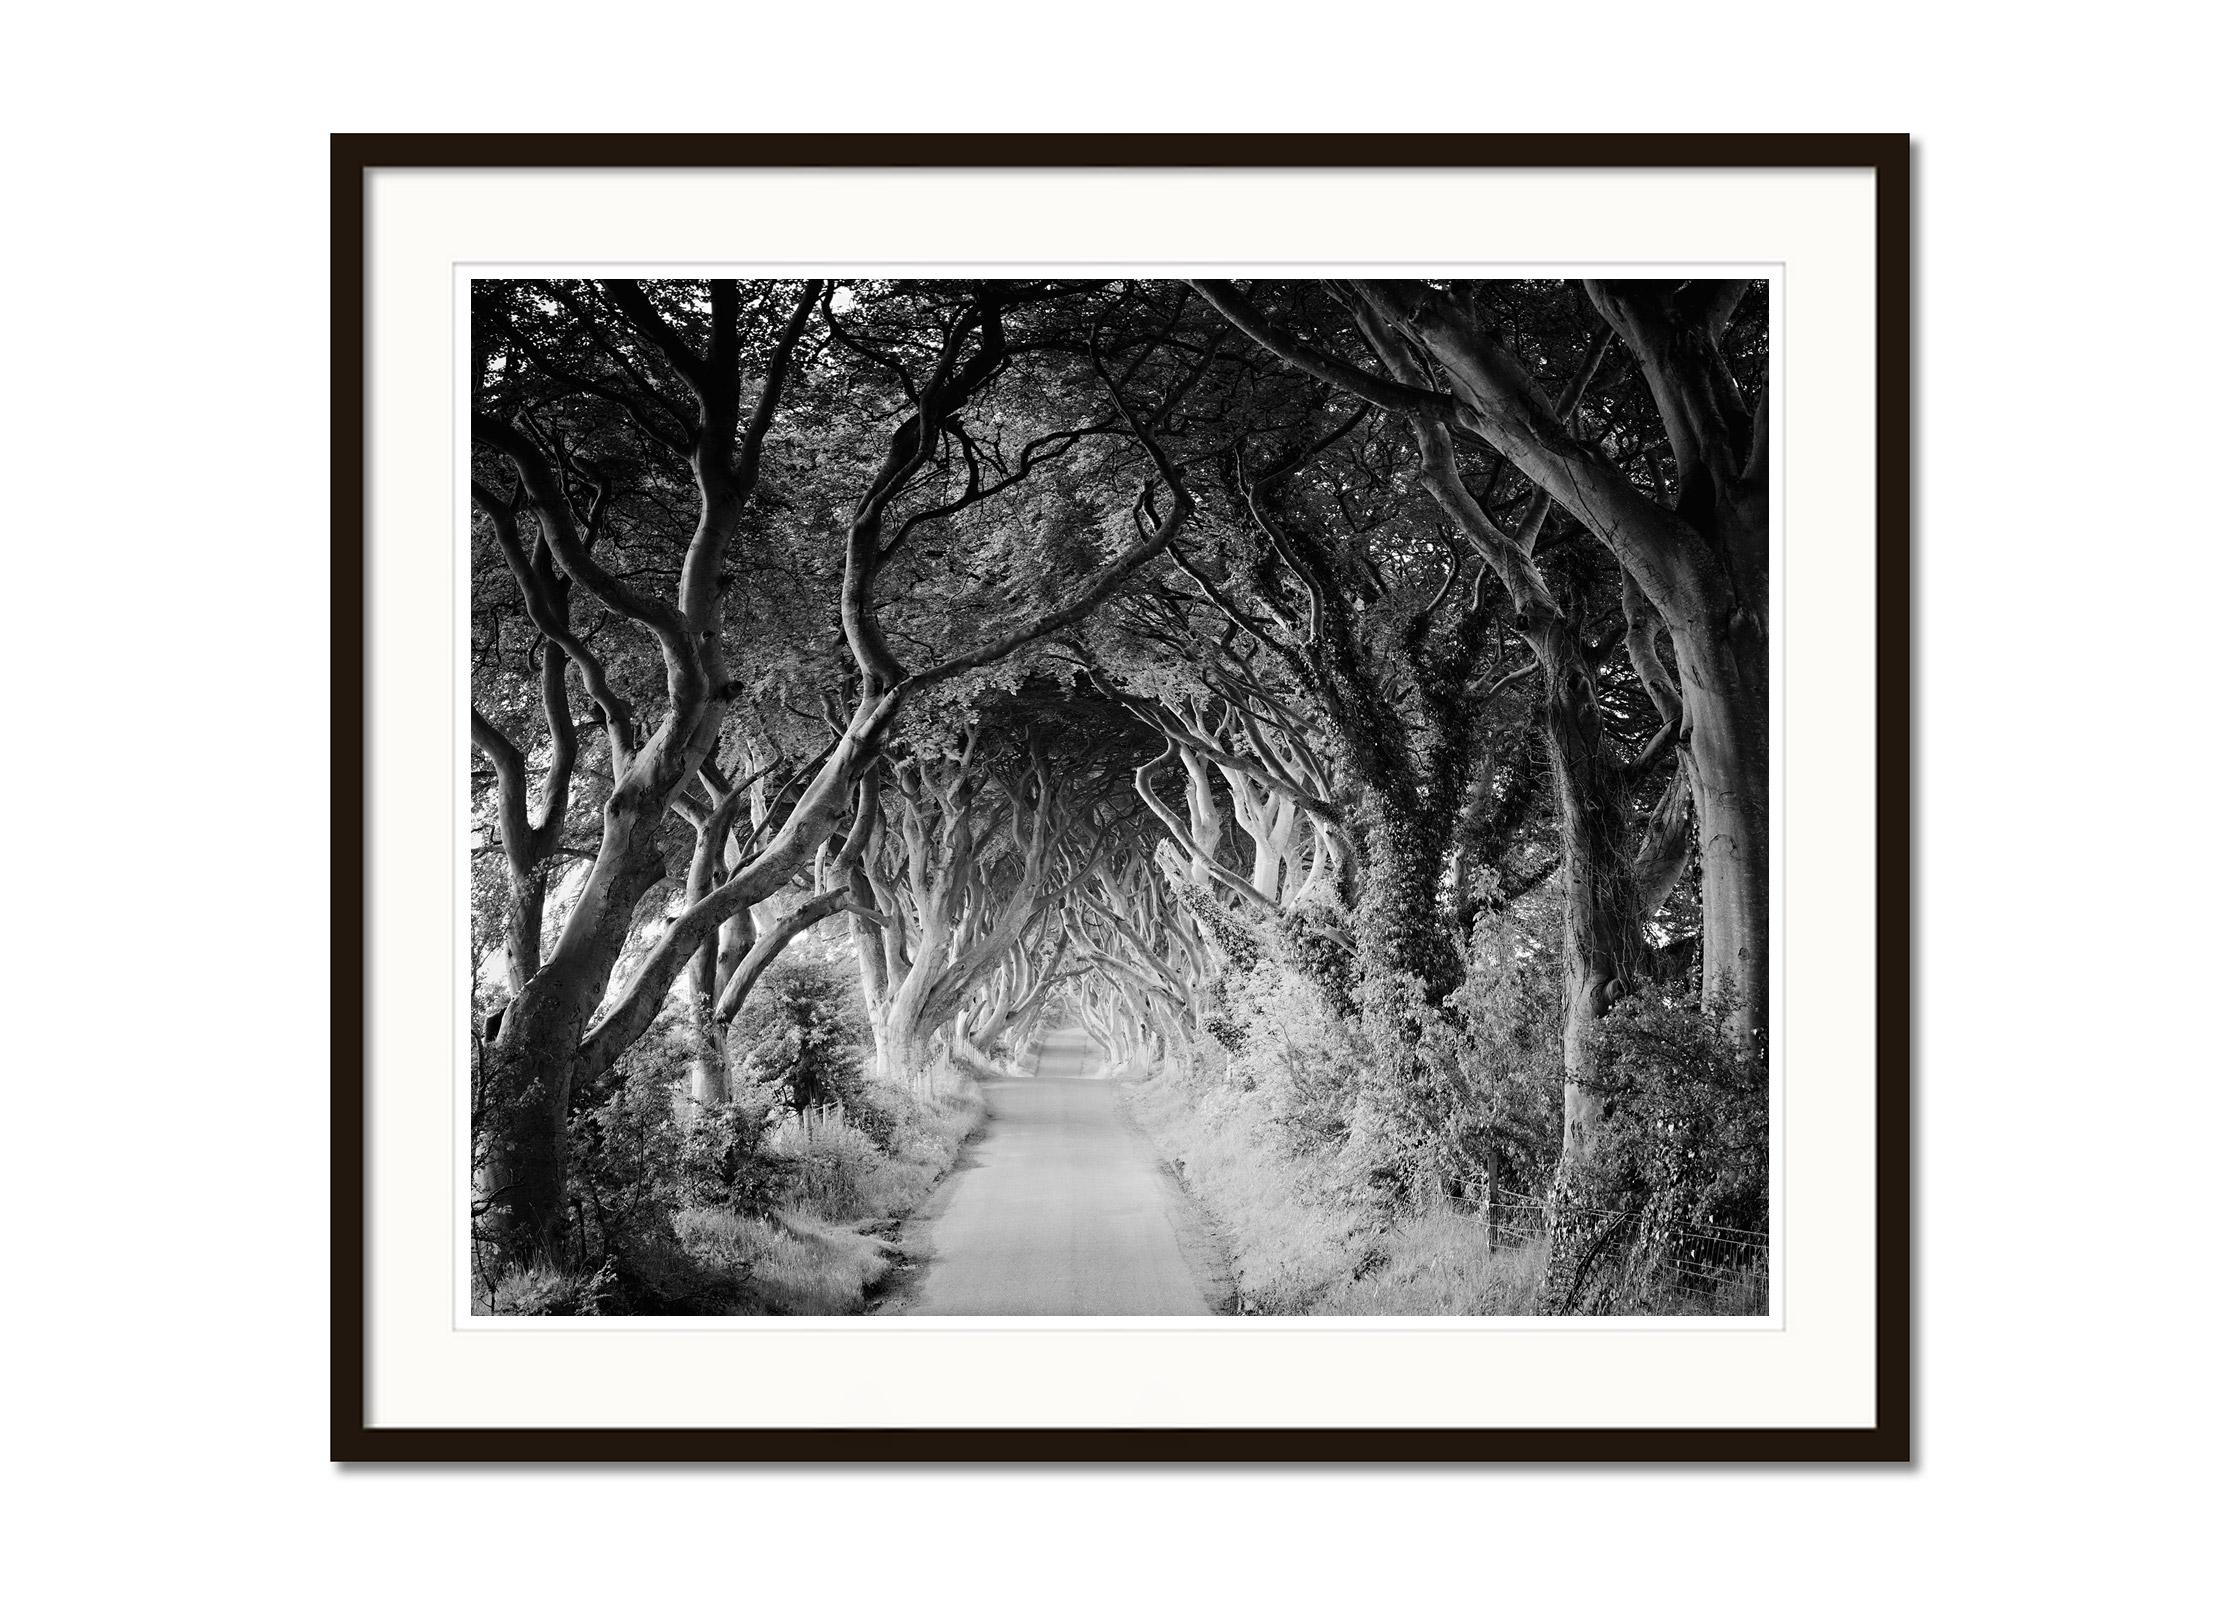 The Dark Hedges, beech trees, Ireland, black & white fine art photography print - Contemporary Photograph by Gerald Berghammer